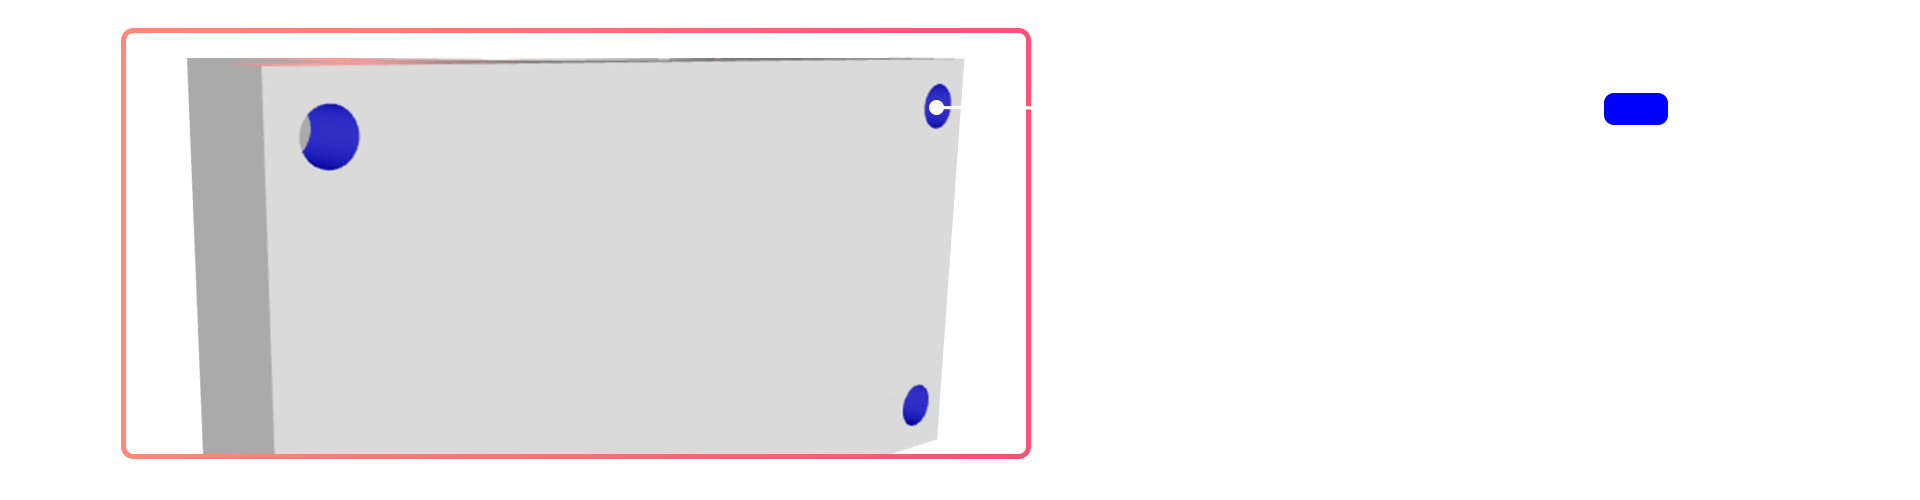 Plyable Hole Detection Example DFM.png